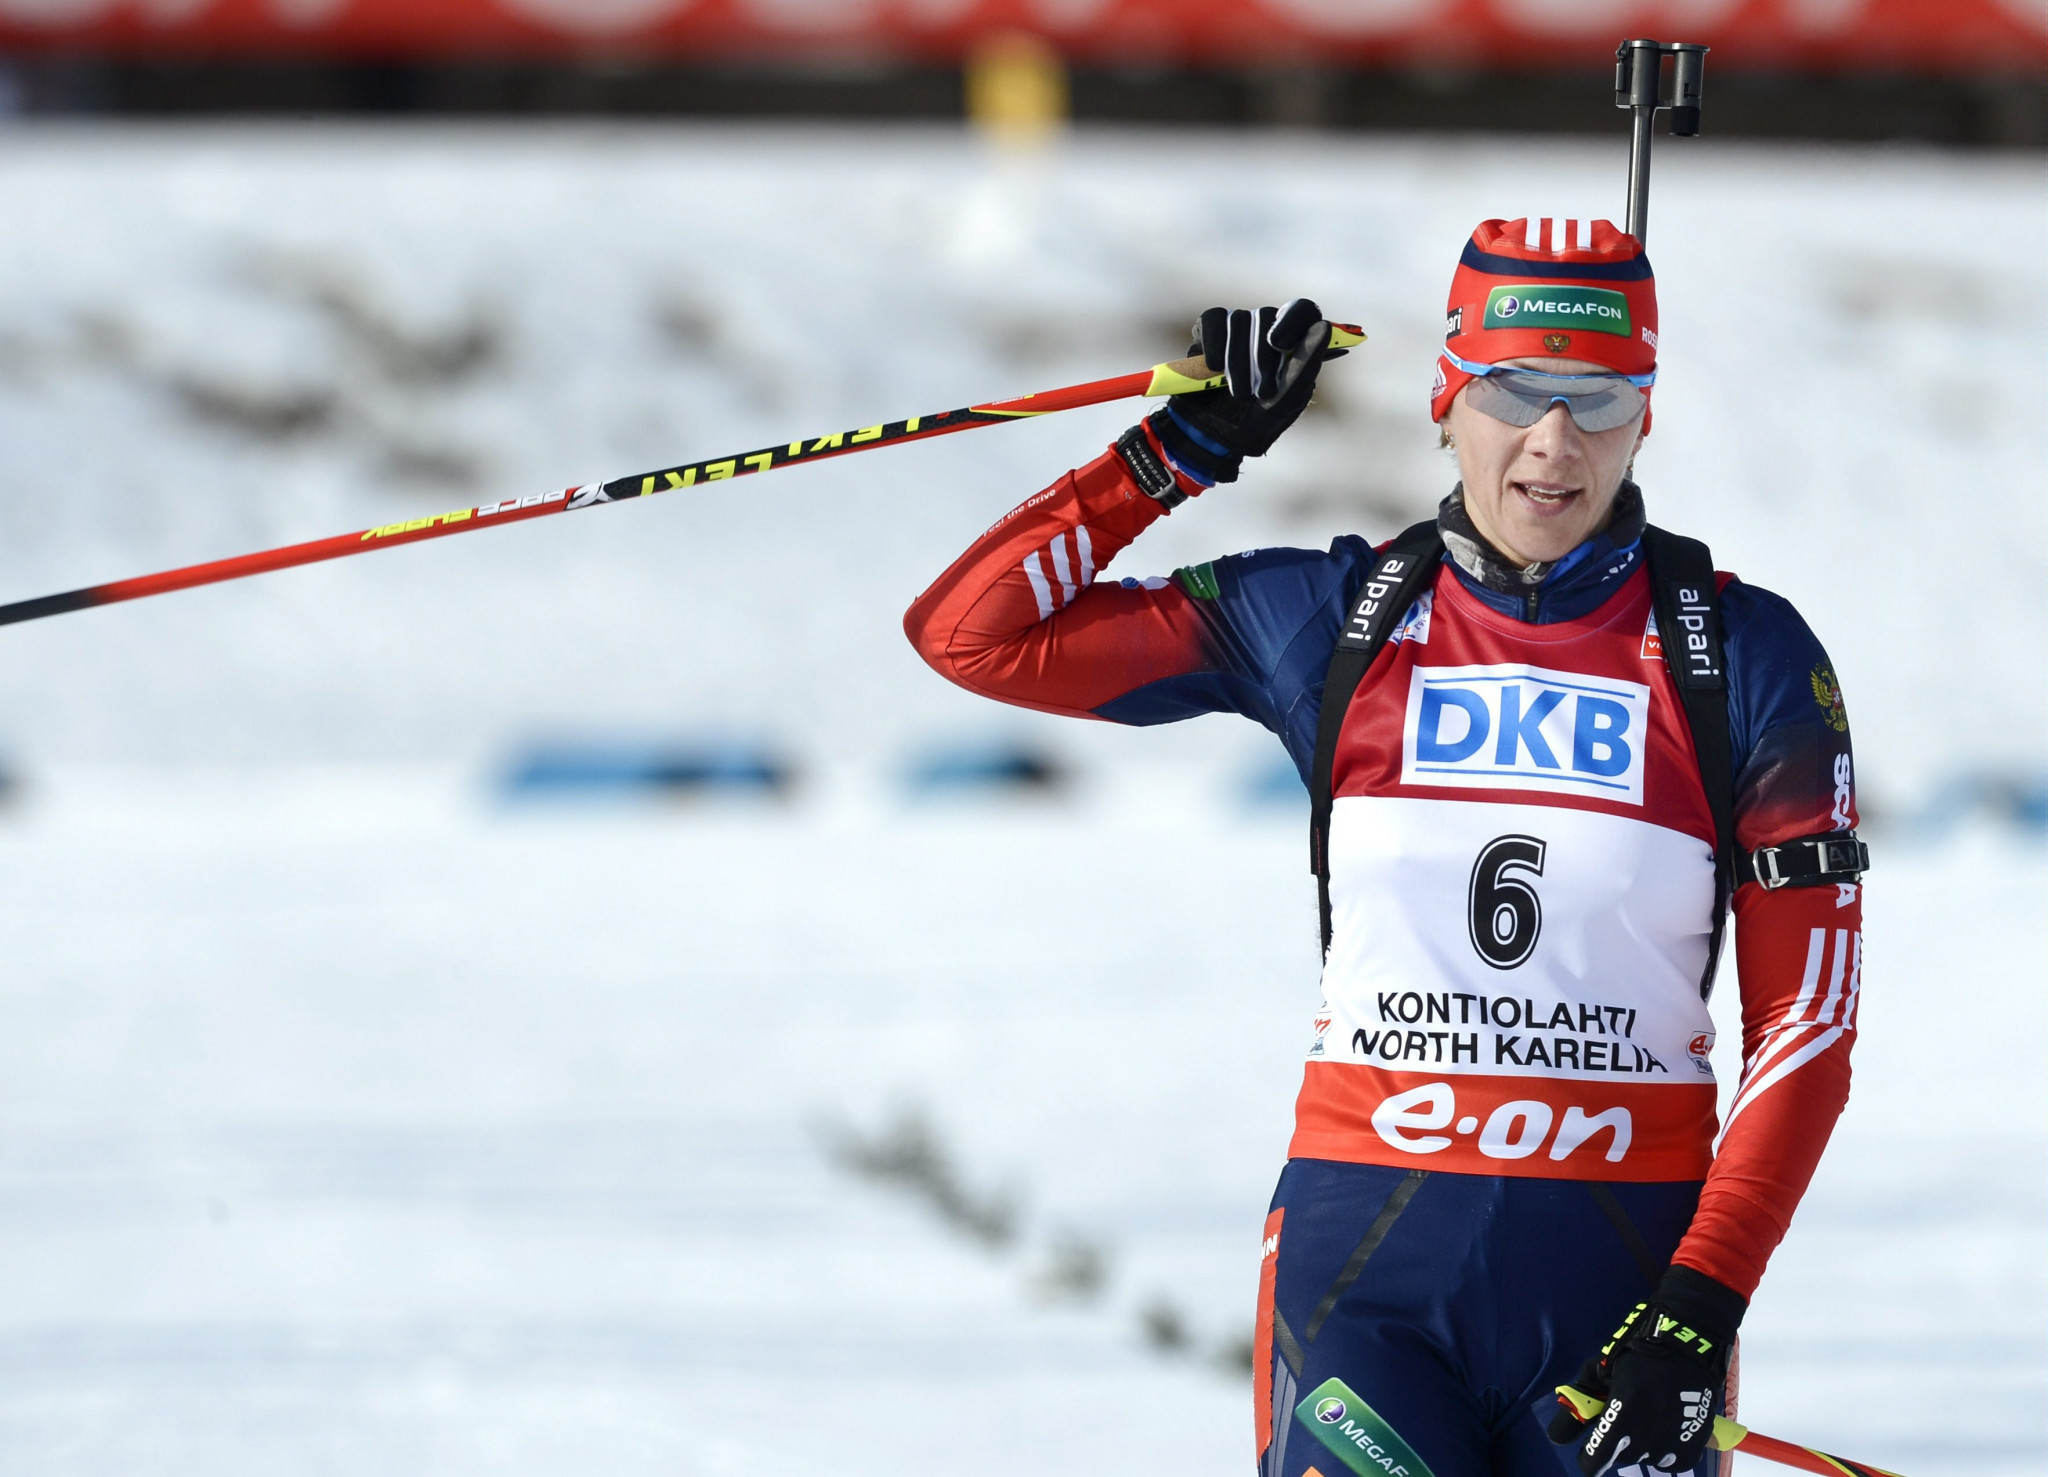 Olga Zaitseva is among the three biathletes banned from the Games for life ©Getty Images